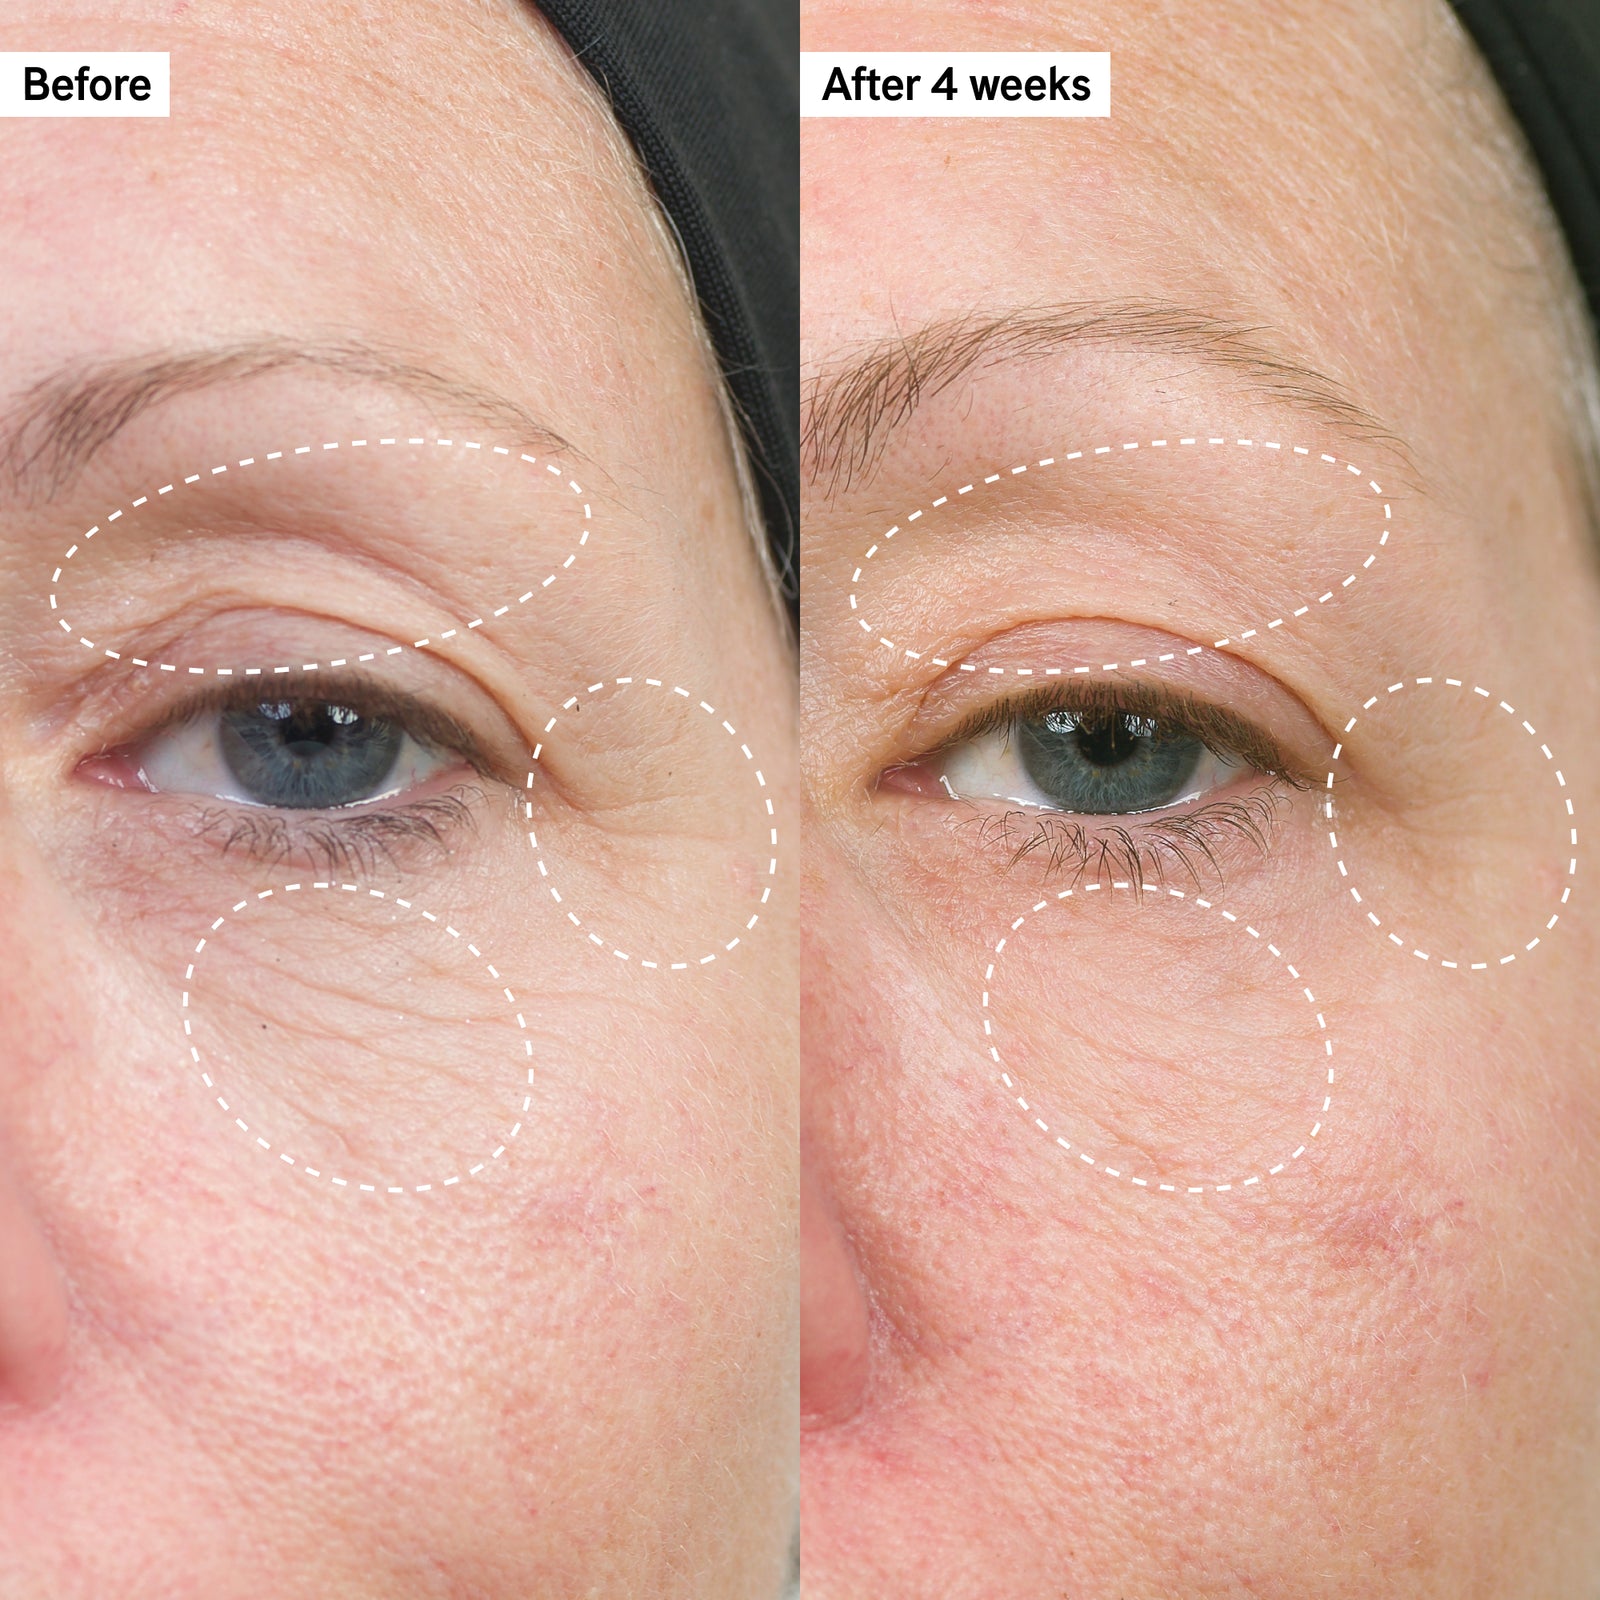 B&A of bio-active cream showing reduced wrinkles